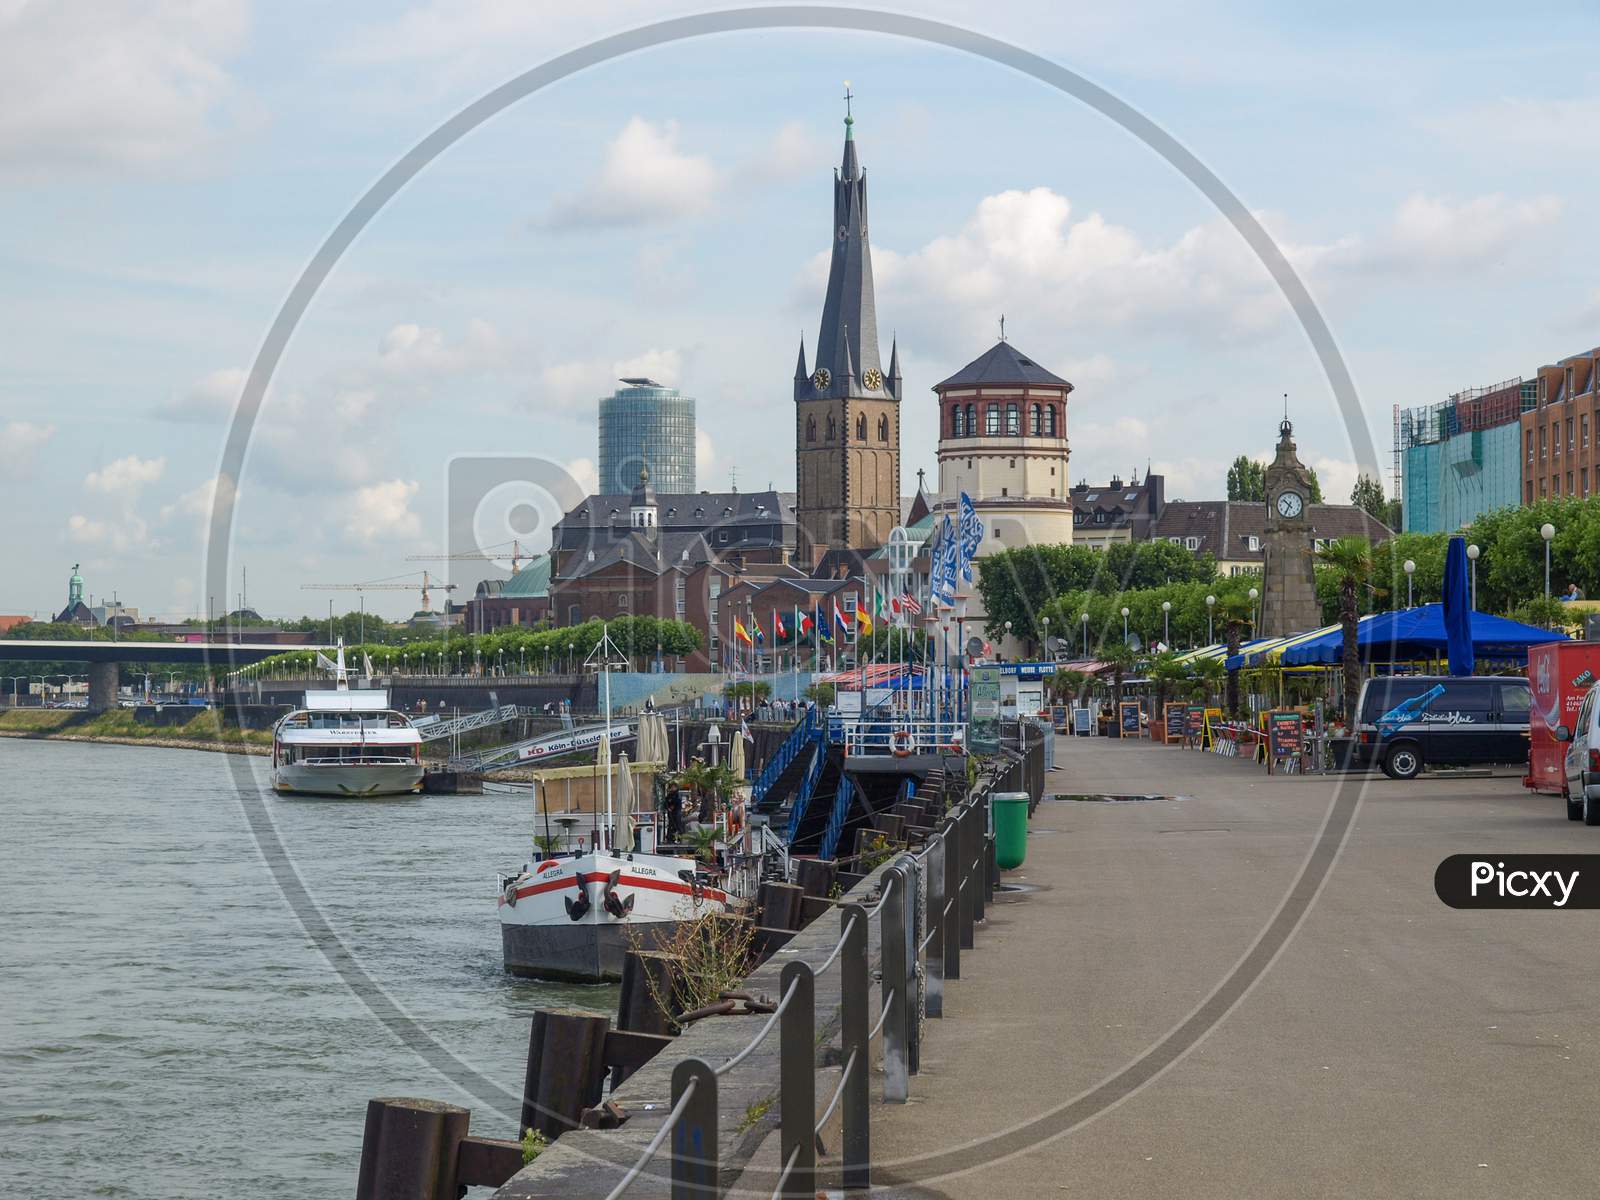 Duesseldorf, Germany - August 03, 2009: Alfresco Bars In Summertime In The Old City Known As The Altstadt By The Riverside Of River Rhein